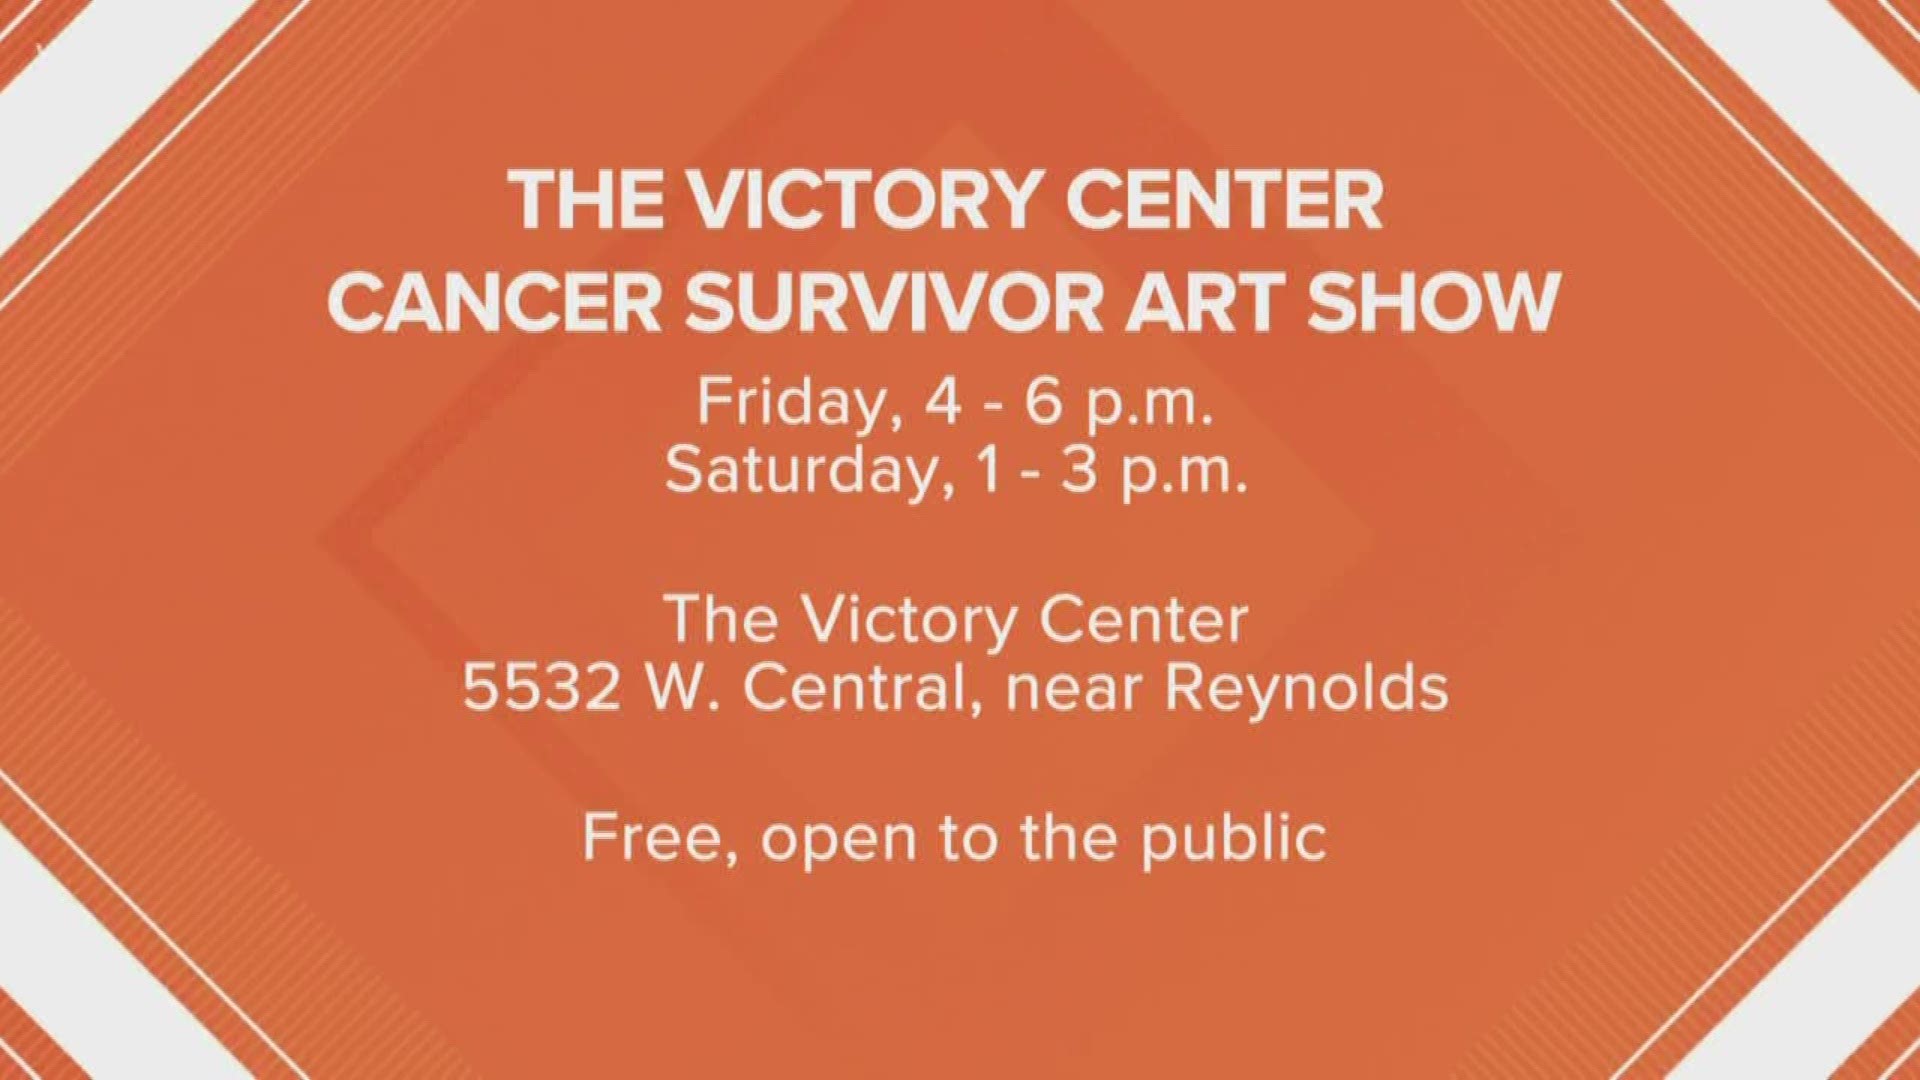 The Victory Center can help cancer survivors get back to being themselves - check out their Cancer Survivor Art Show this weekend!